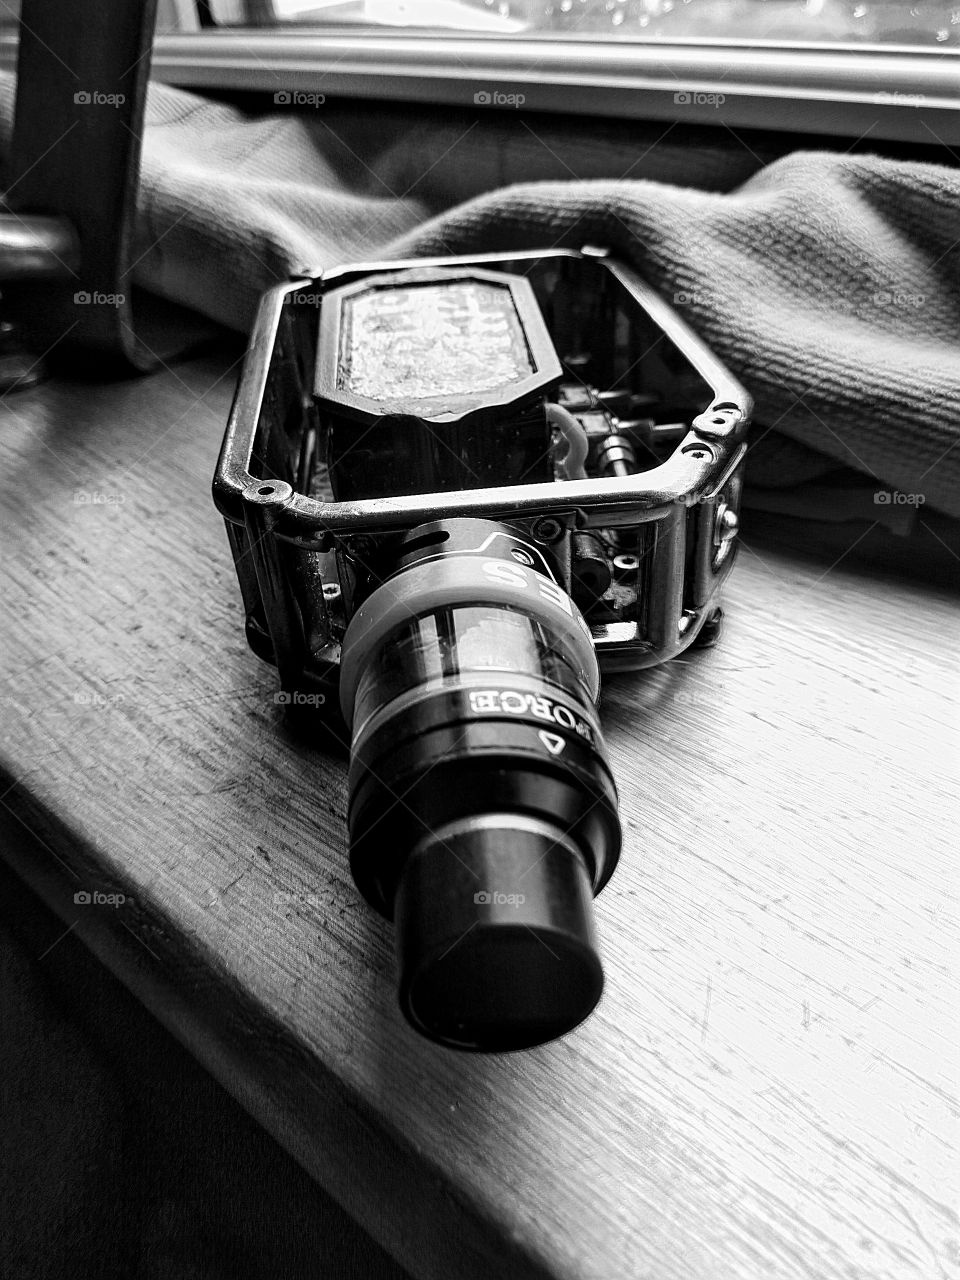 my vape in black and white